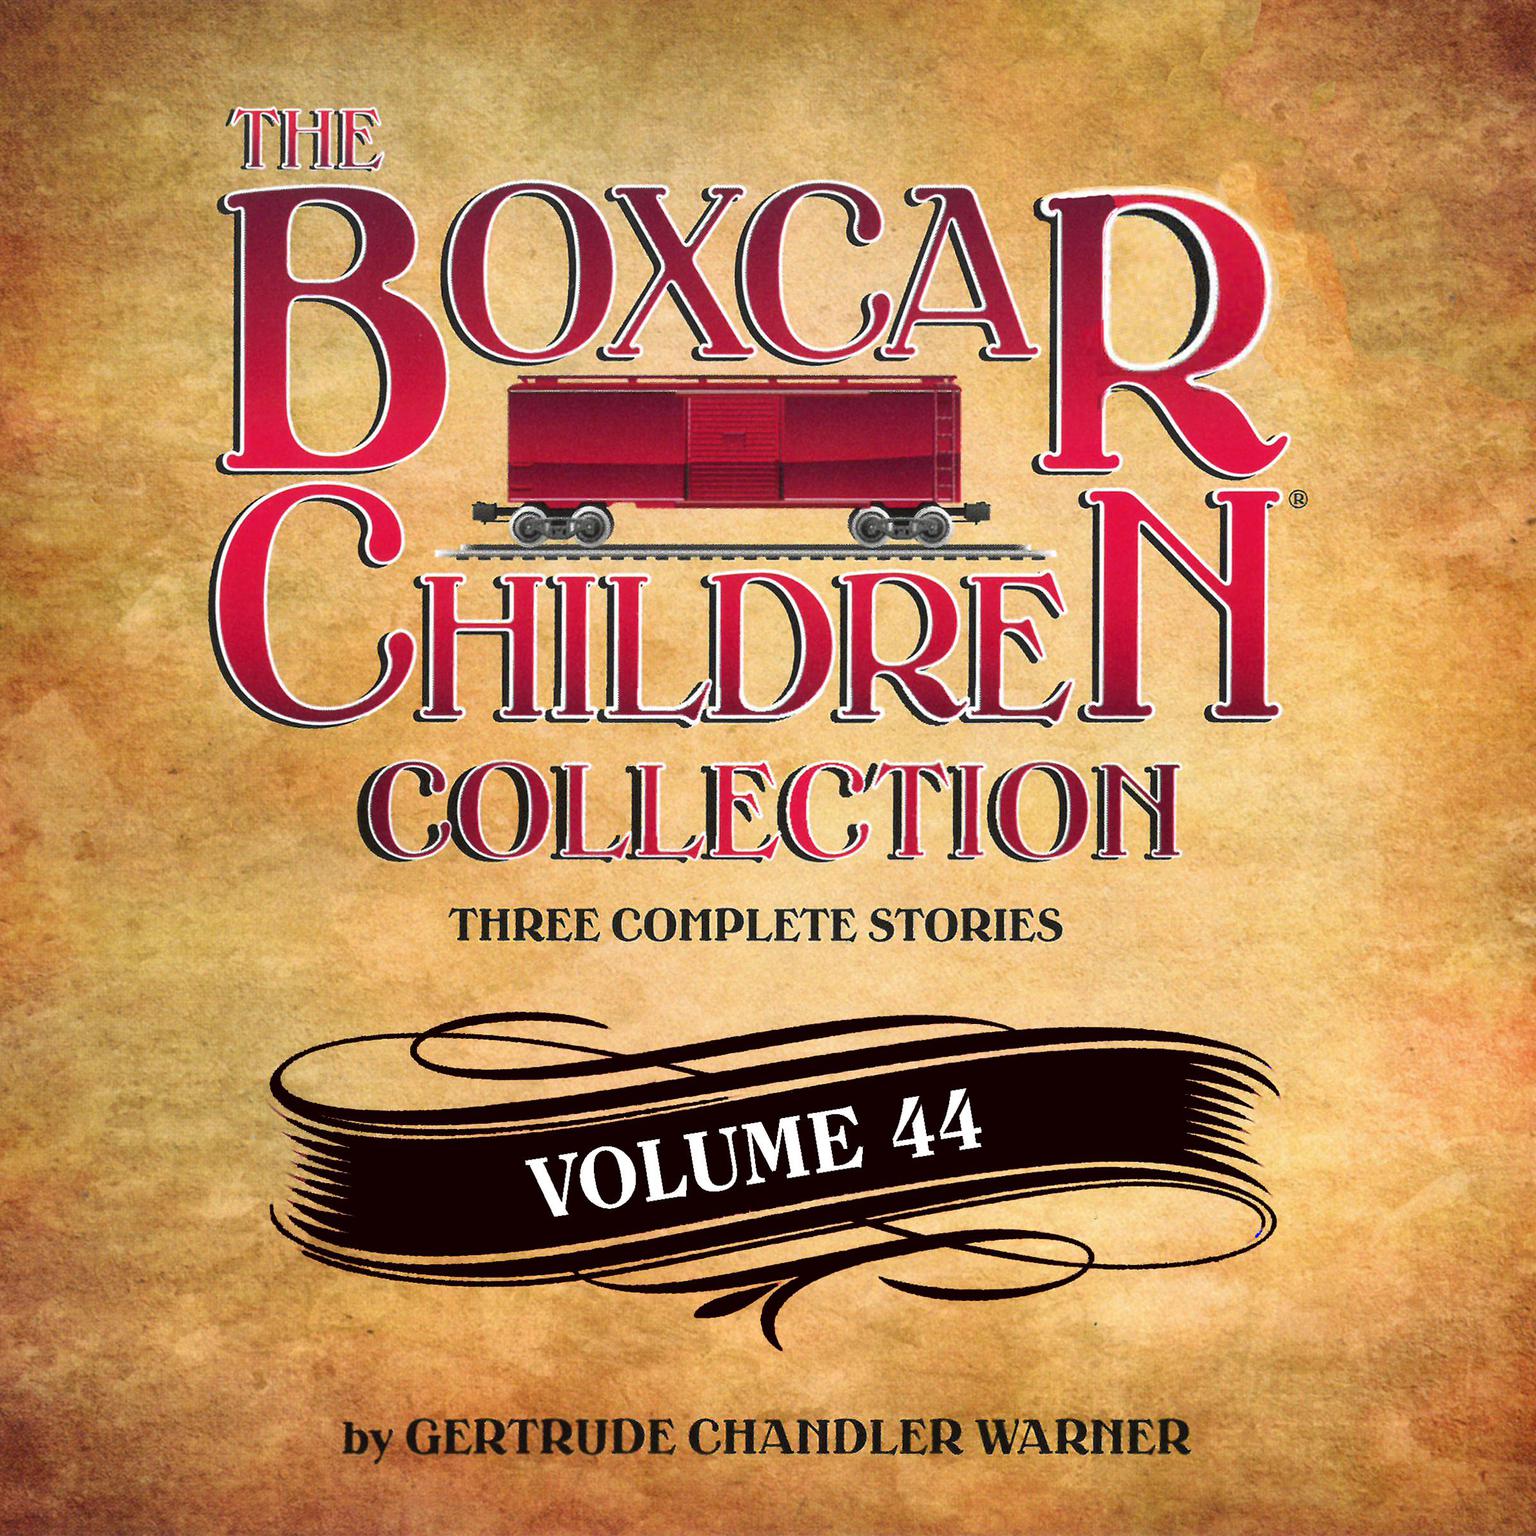 The Boxcar Children Collection Volume 44: The Boardwalk Mystery, Mystery of the Fallen Treasure, The Return of the Graveyard Ghost Audiobook, by Gertrude Chandler Warner